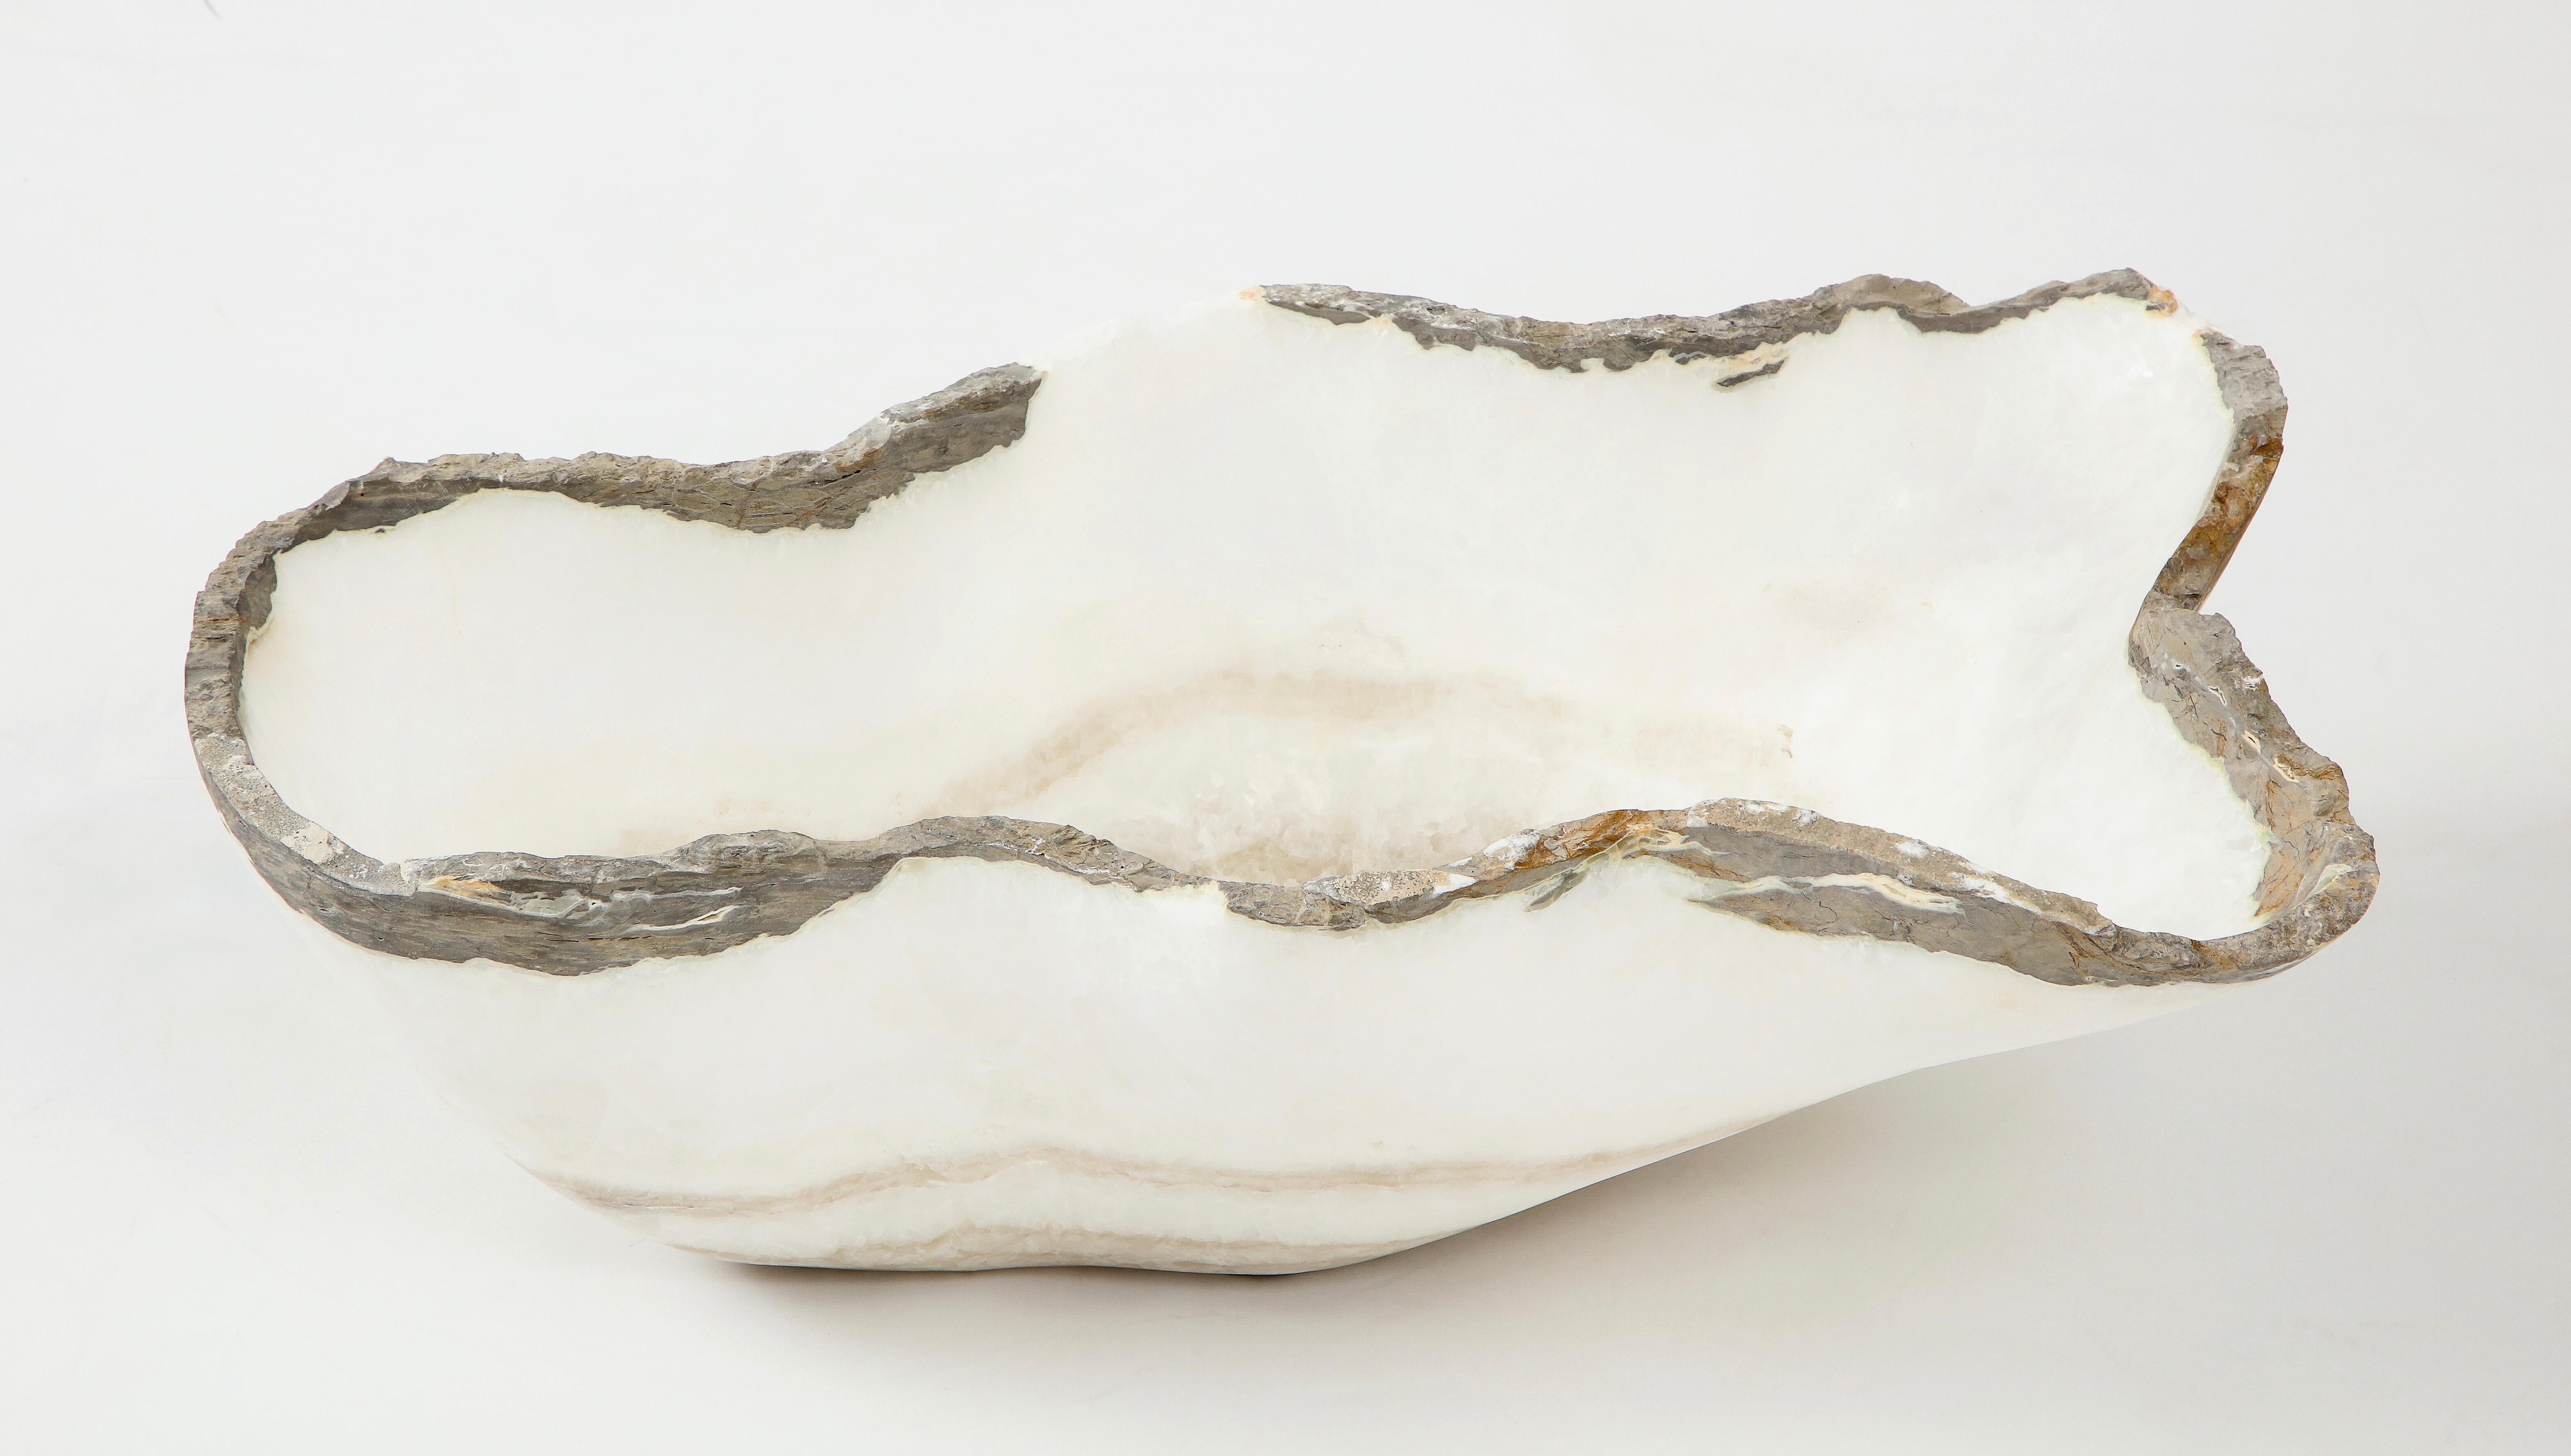 A large white and gray hand carved raw edge onyx bowl or centerpiece in an impressive size. The dark gray edge provides a dramatic contrast with the Stark white calcite body banded with lighter gray rings towards the bottom. Utilitarian and